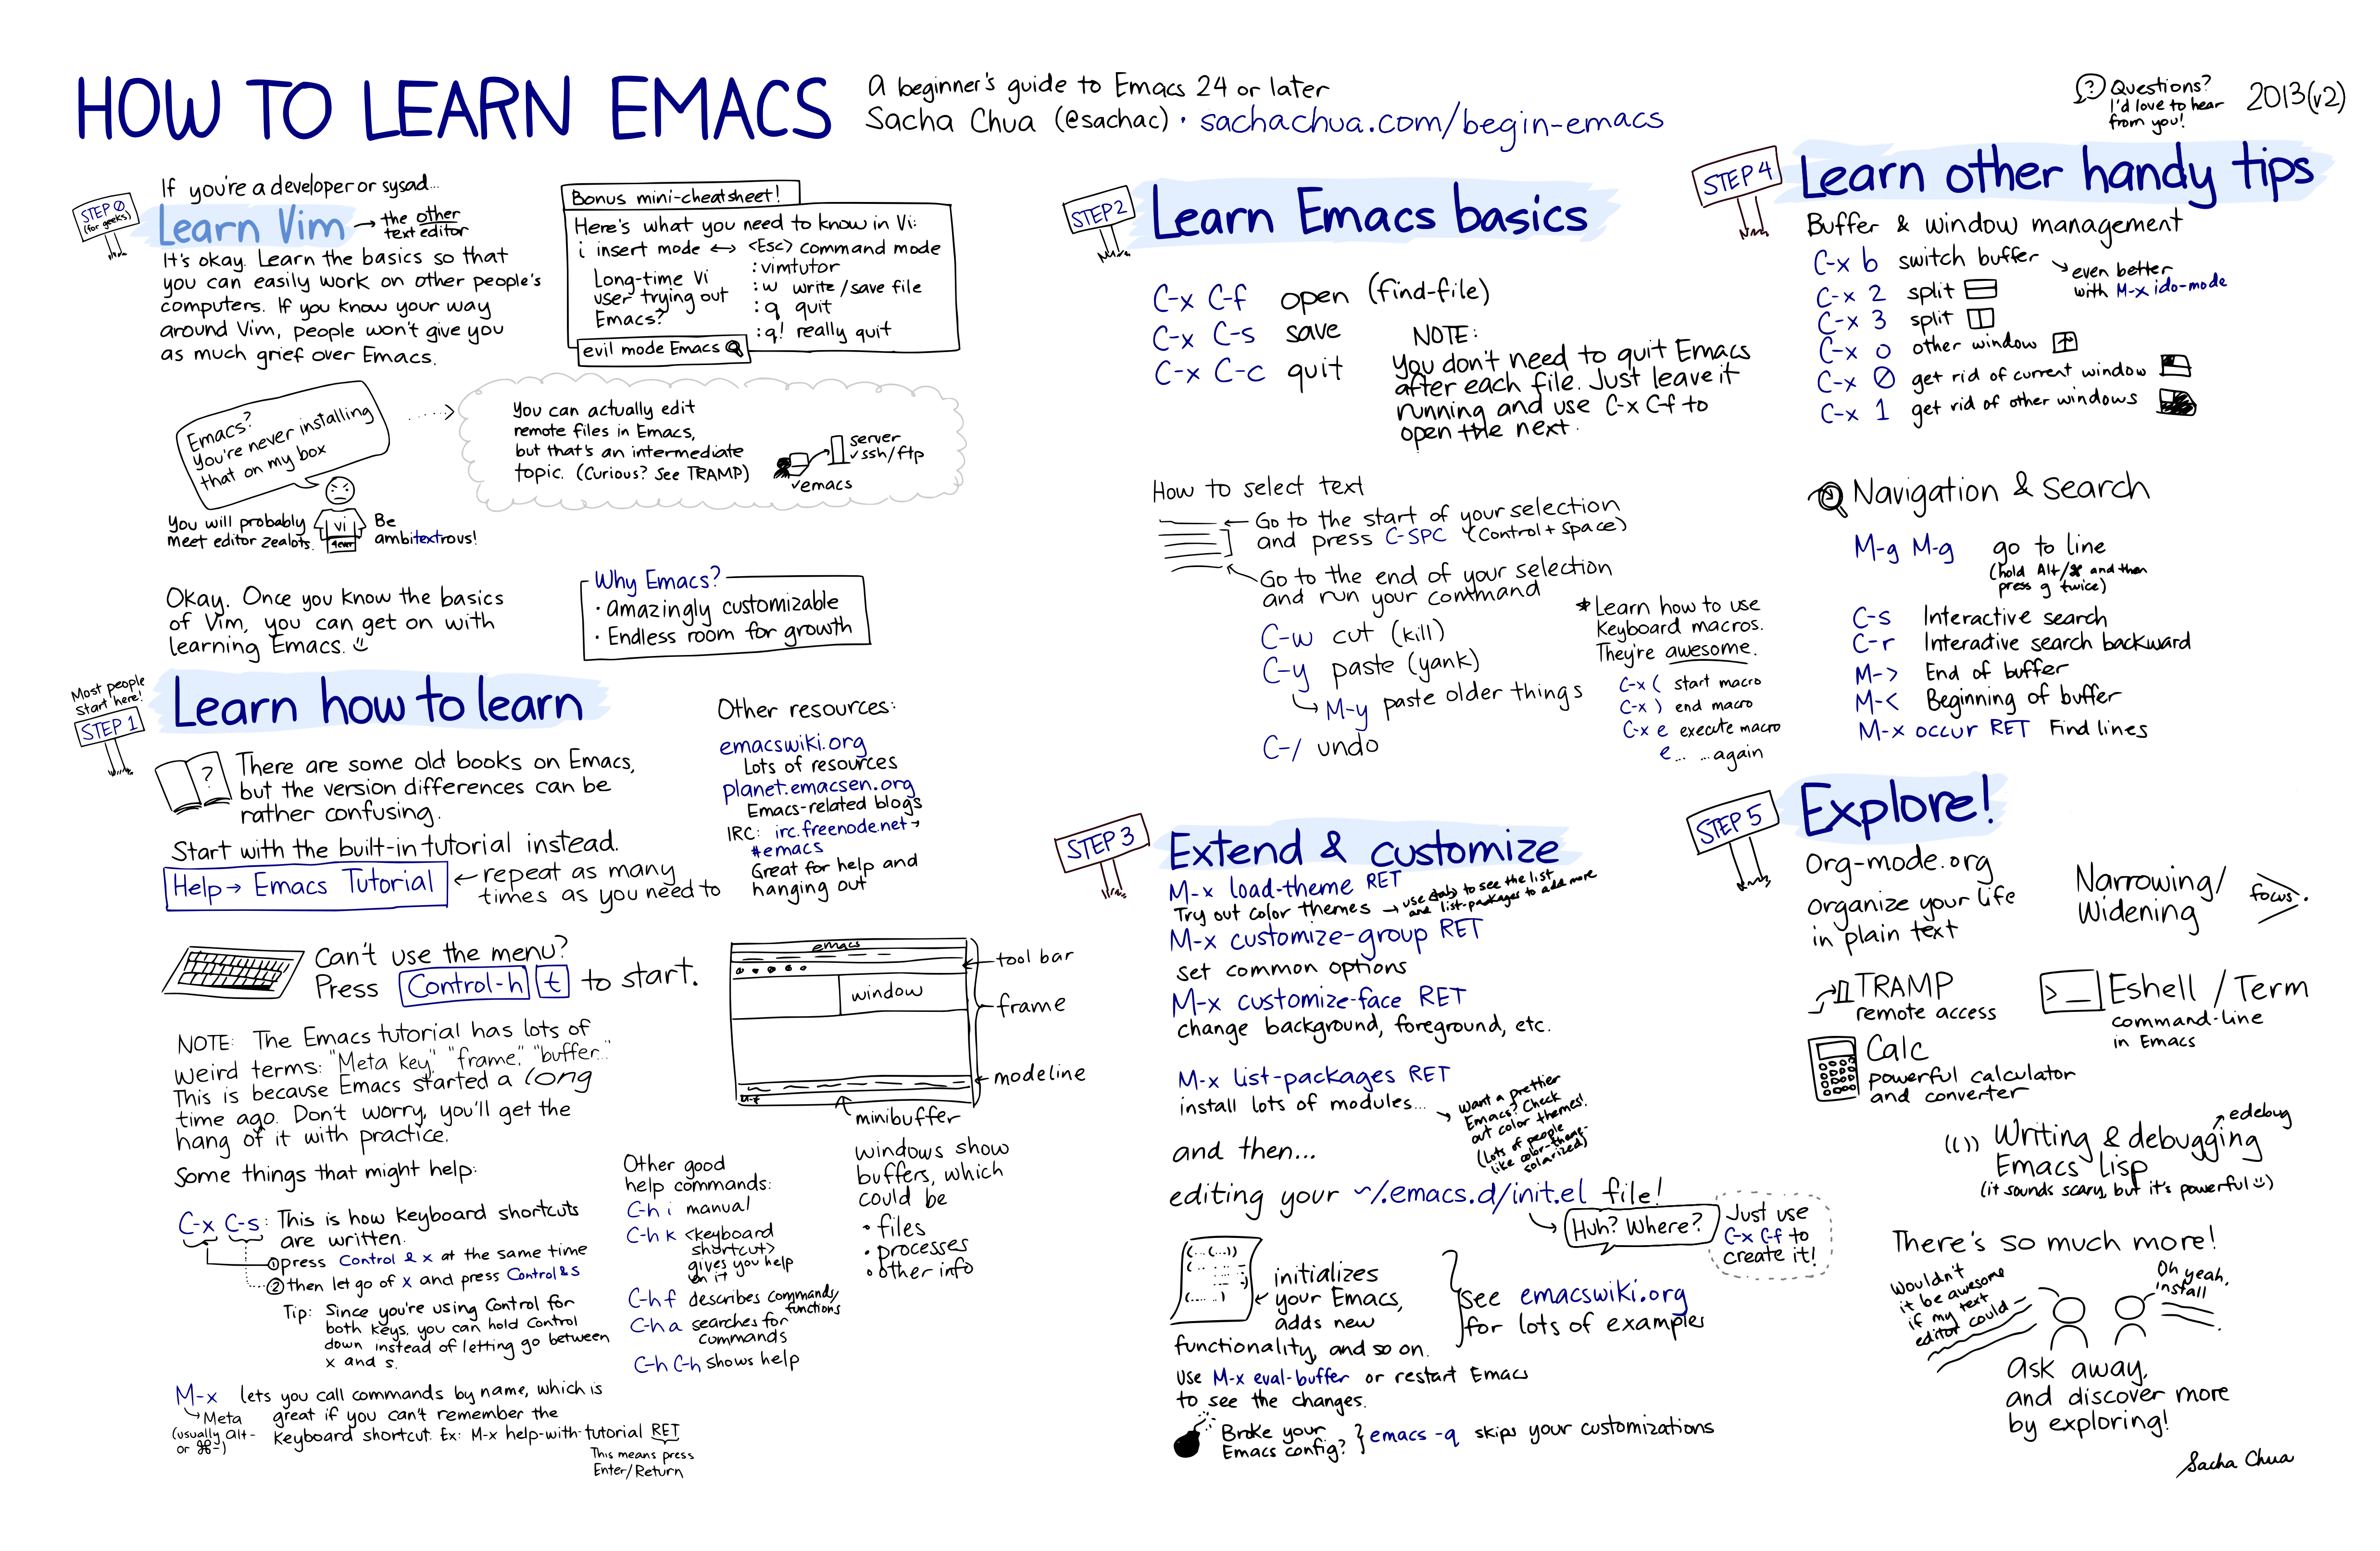 How-to-Learn-Emacs-v2-Large.png